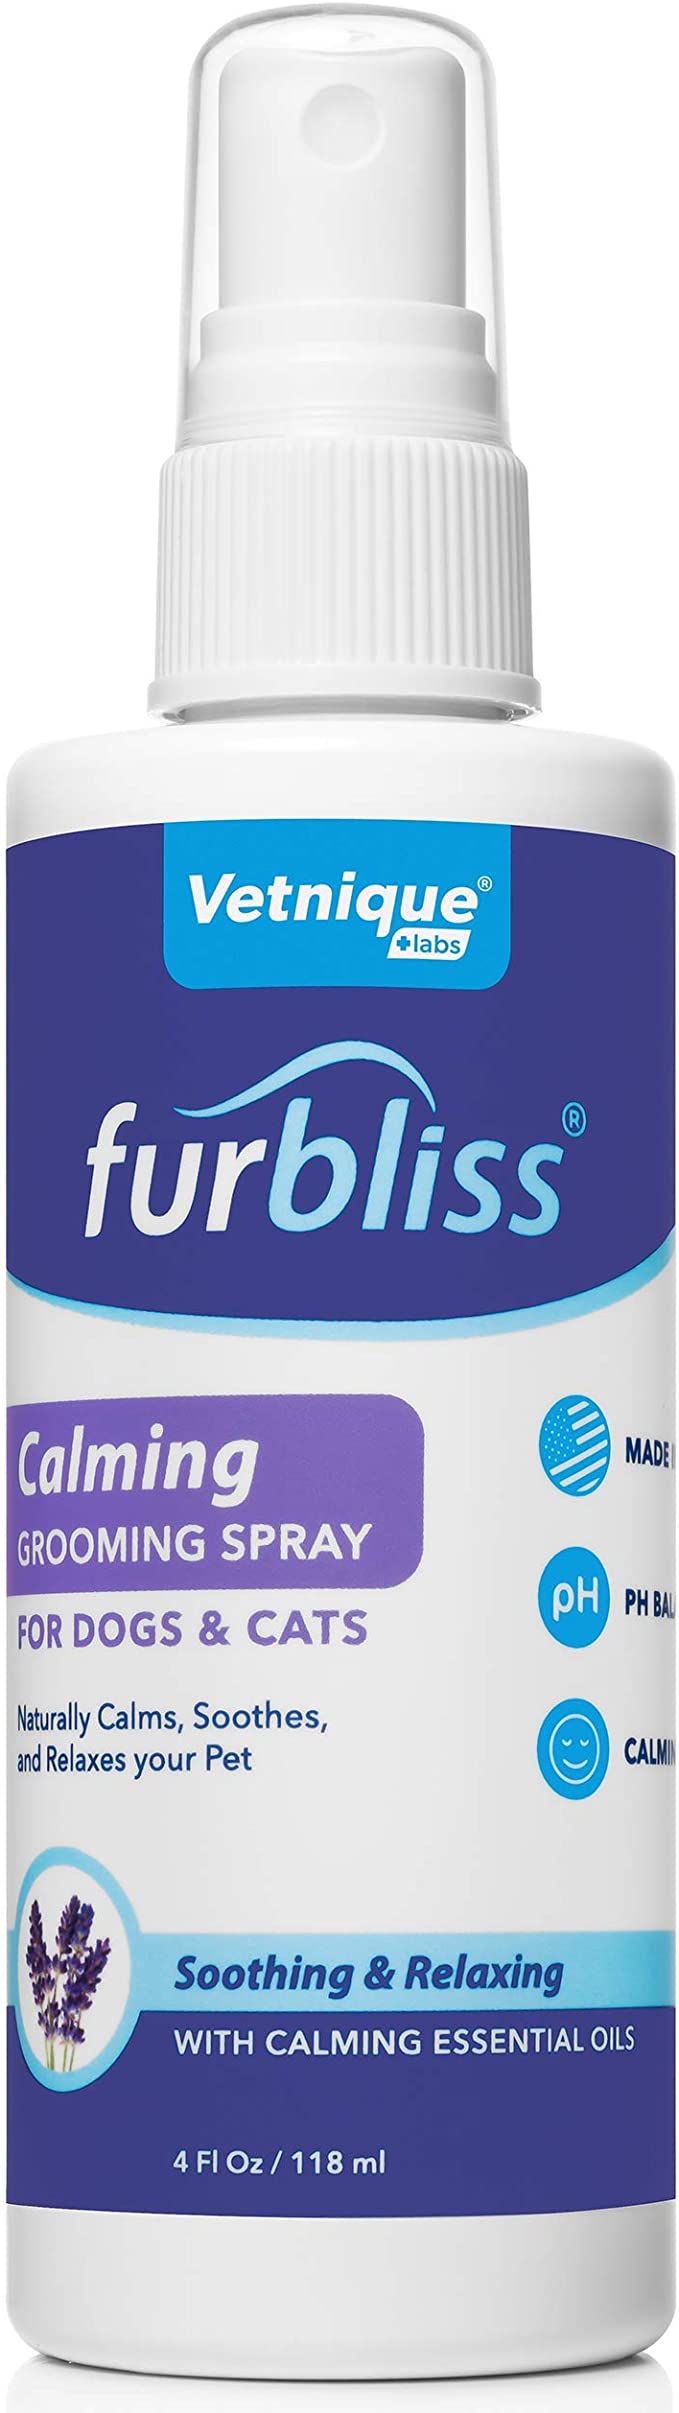 Furbliss Calming Dog Cologne and Cat Perfume Spray, with Calming Essential Oils for Dogs and Cats, Create an Anxiety Free Experience for Your Pet - by Vetnique Labs